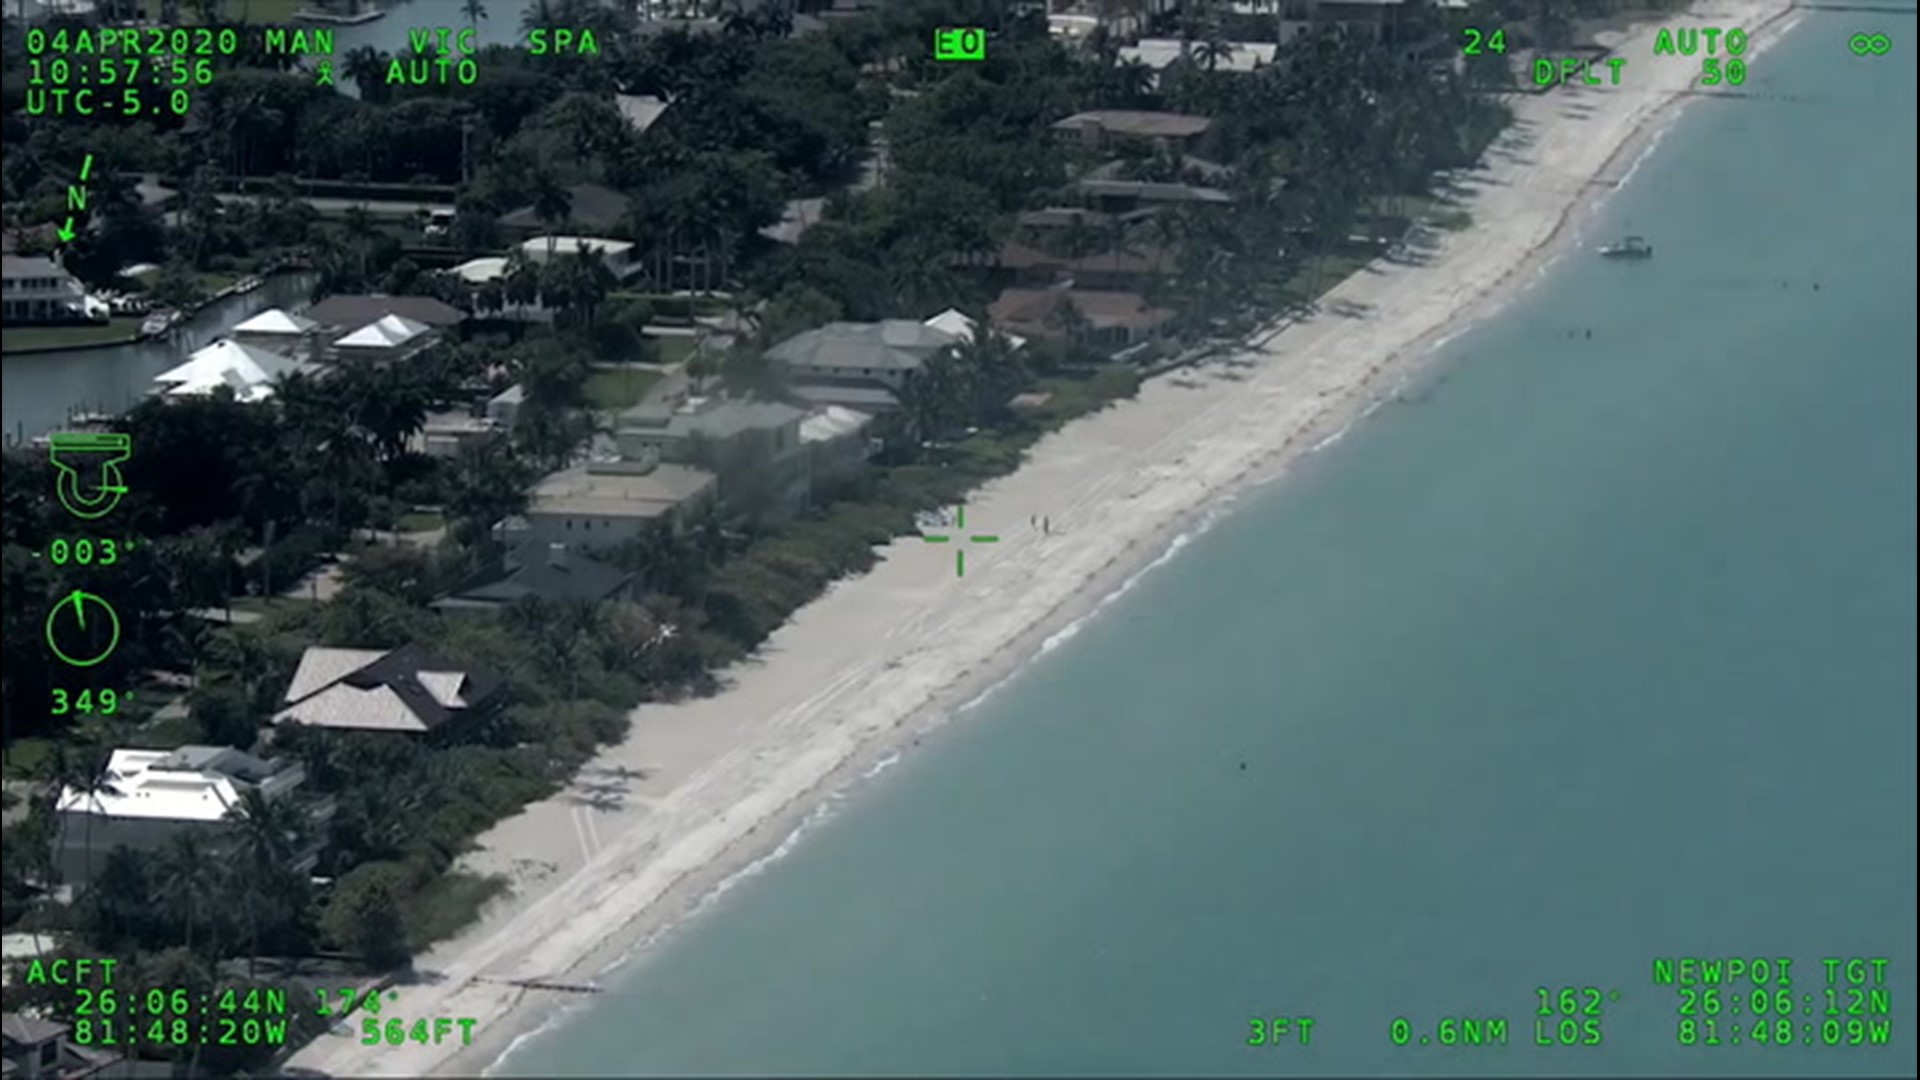 This beach in the Naples, Florida, area is normally crowded. However, on April 6 it was empty due to closures enforced to prevent the spread of COVID-19.